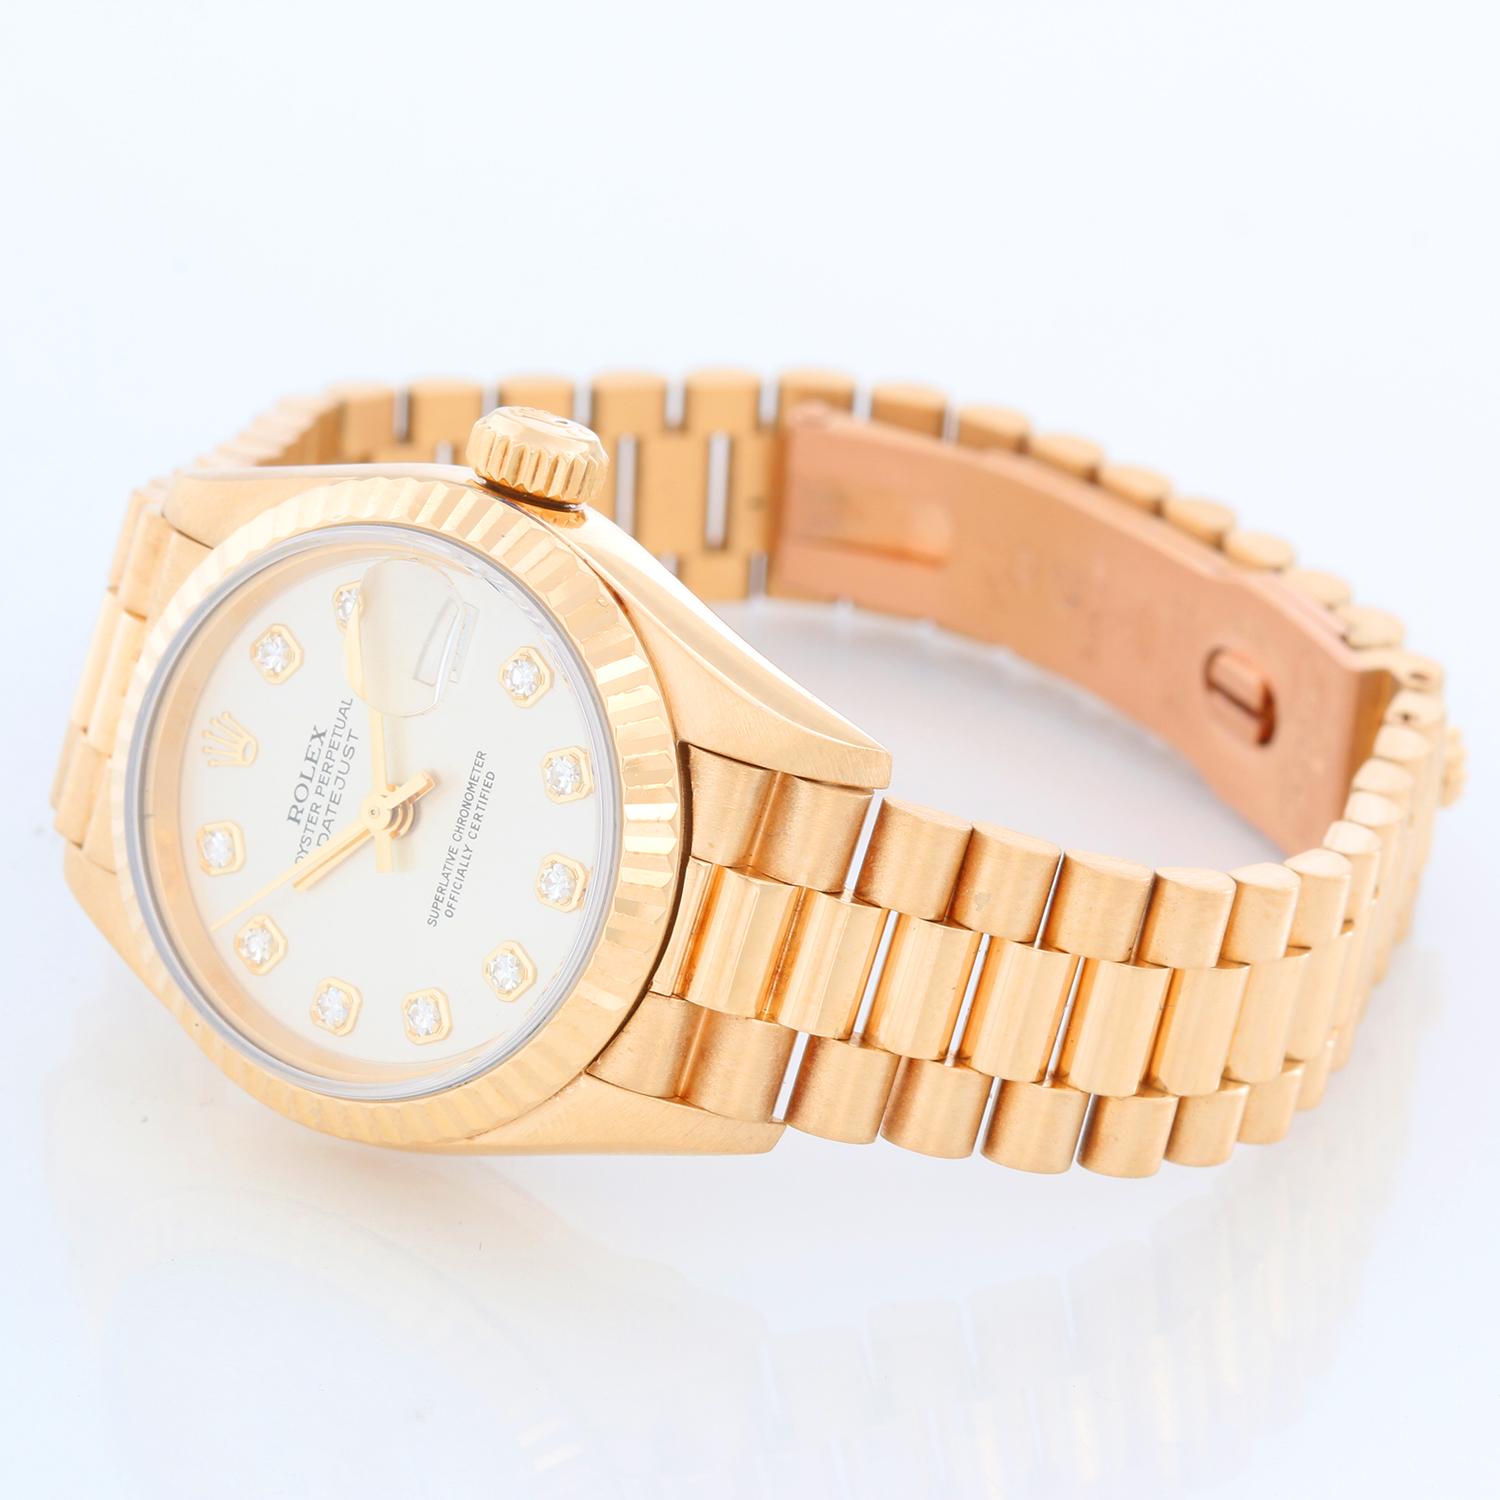 Rolex Lady President 18k Yellow Gold Ladies Watch 79178 - Automatic winding, 31 jewels, Quickset date, sapphire crystal. 18k yellow gold case(26mm diameter). Silver dial with factory diamond hour markers. 18k yellow gold Rolex hidden-clasp President